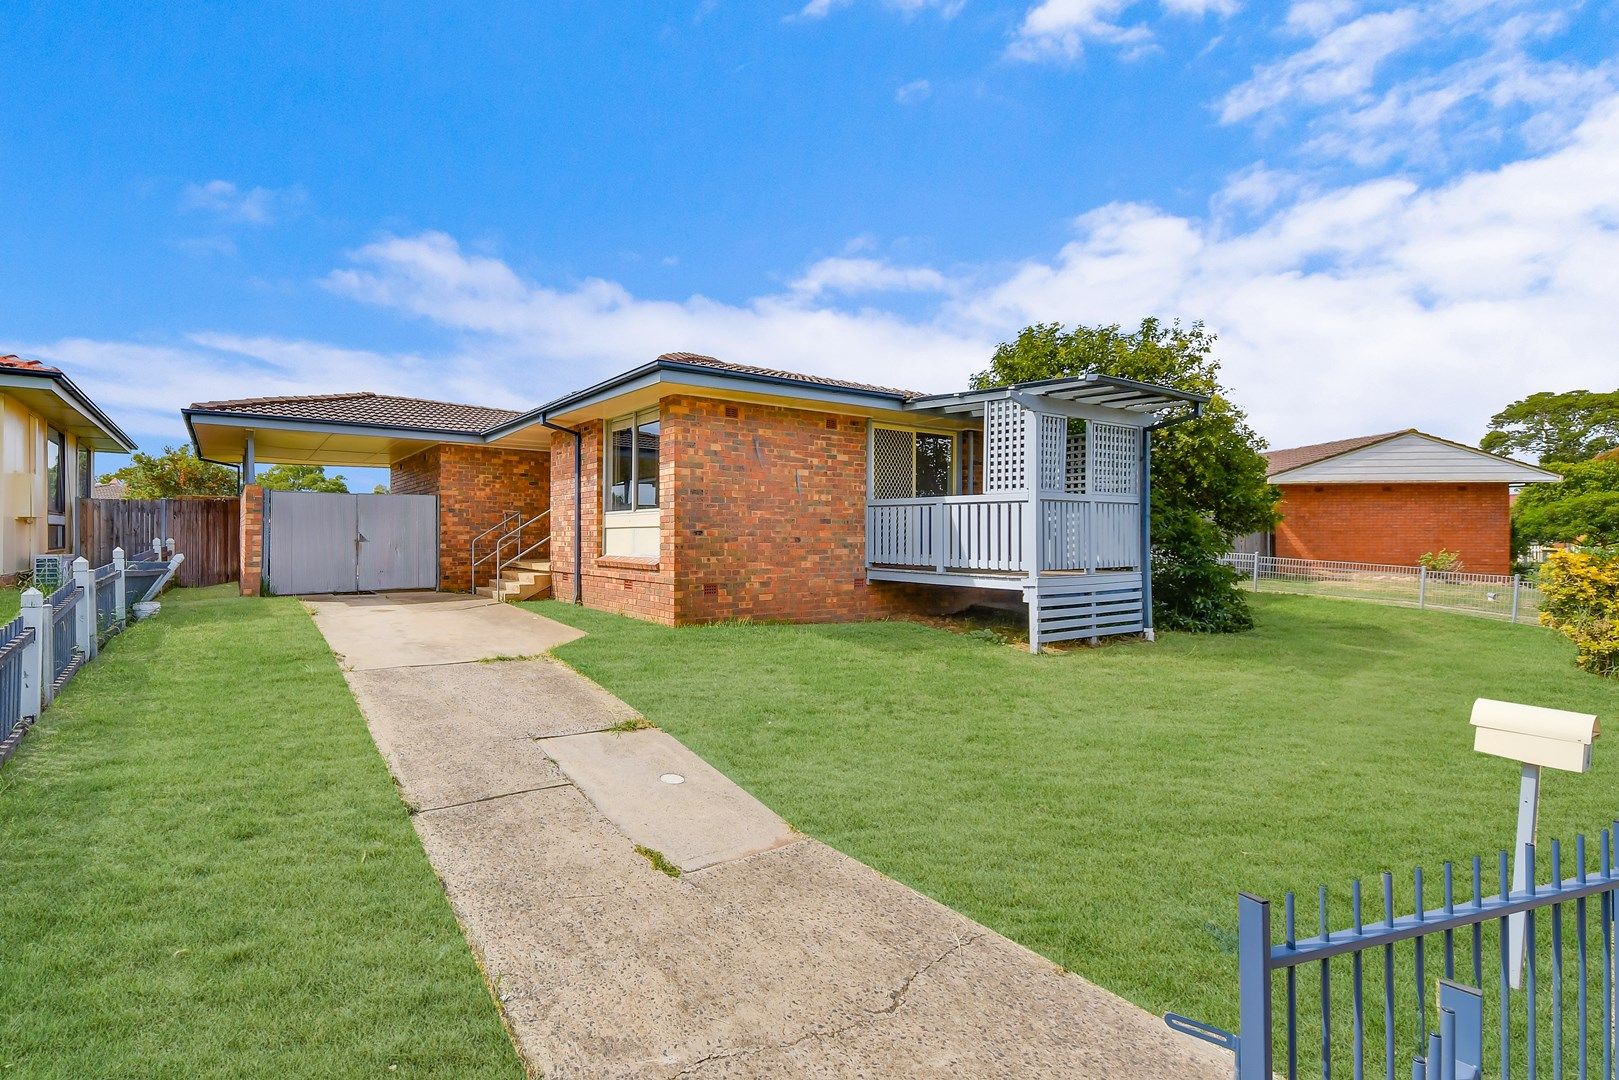 3 bedrooms House in 4 Waterhouse Place AIRDS NSW, 2560